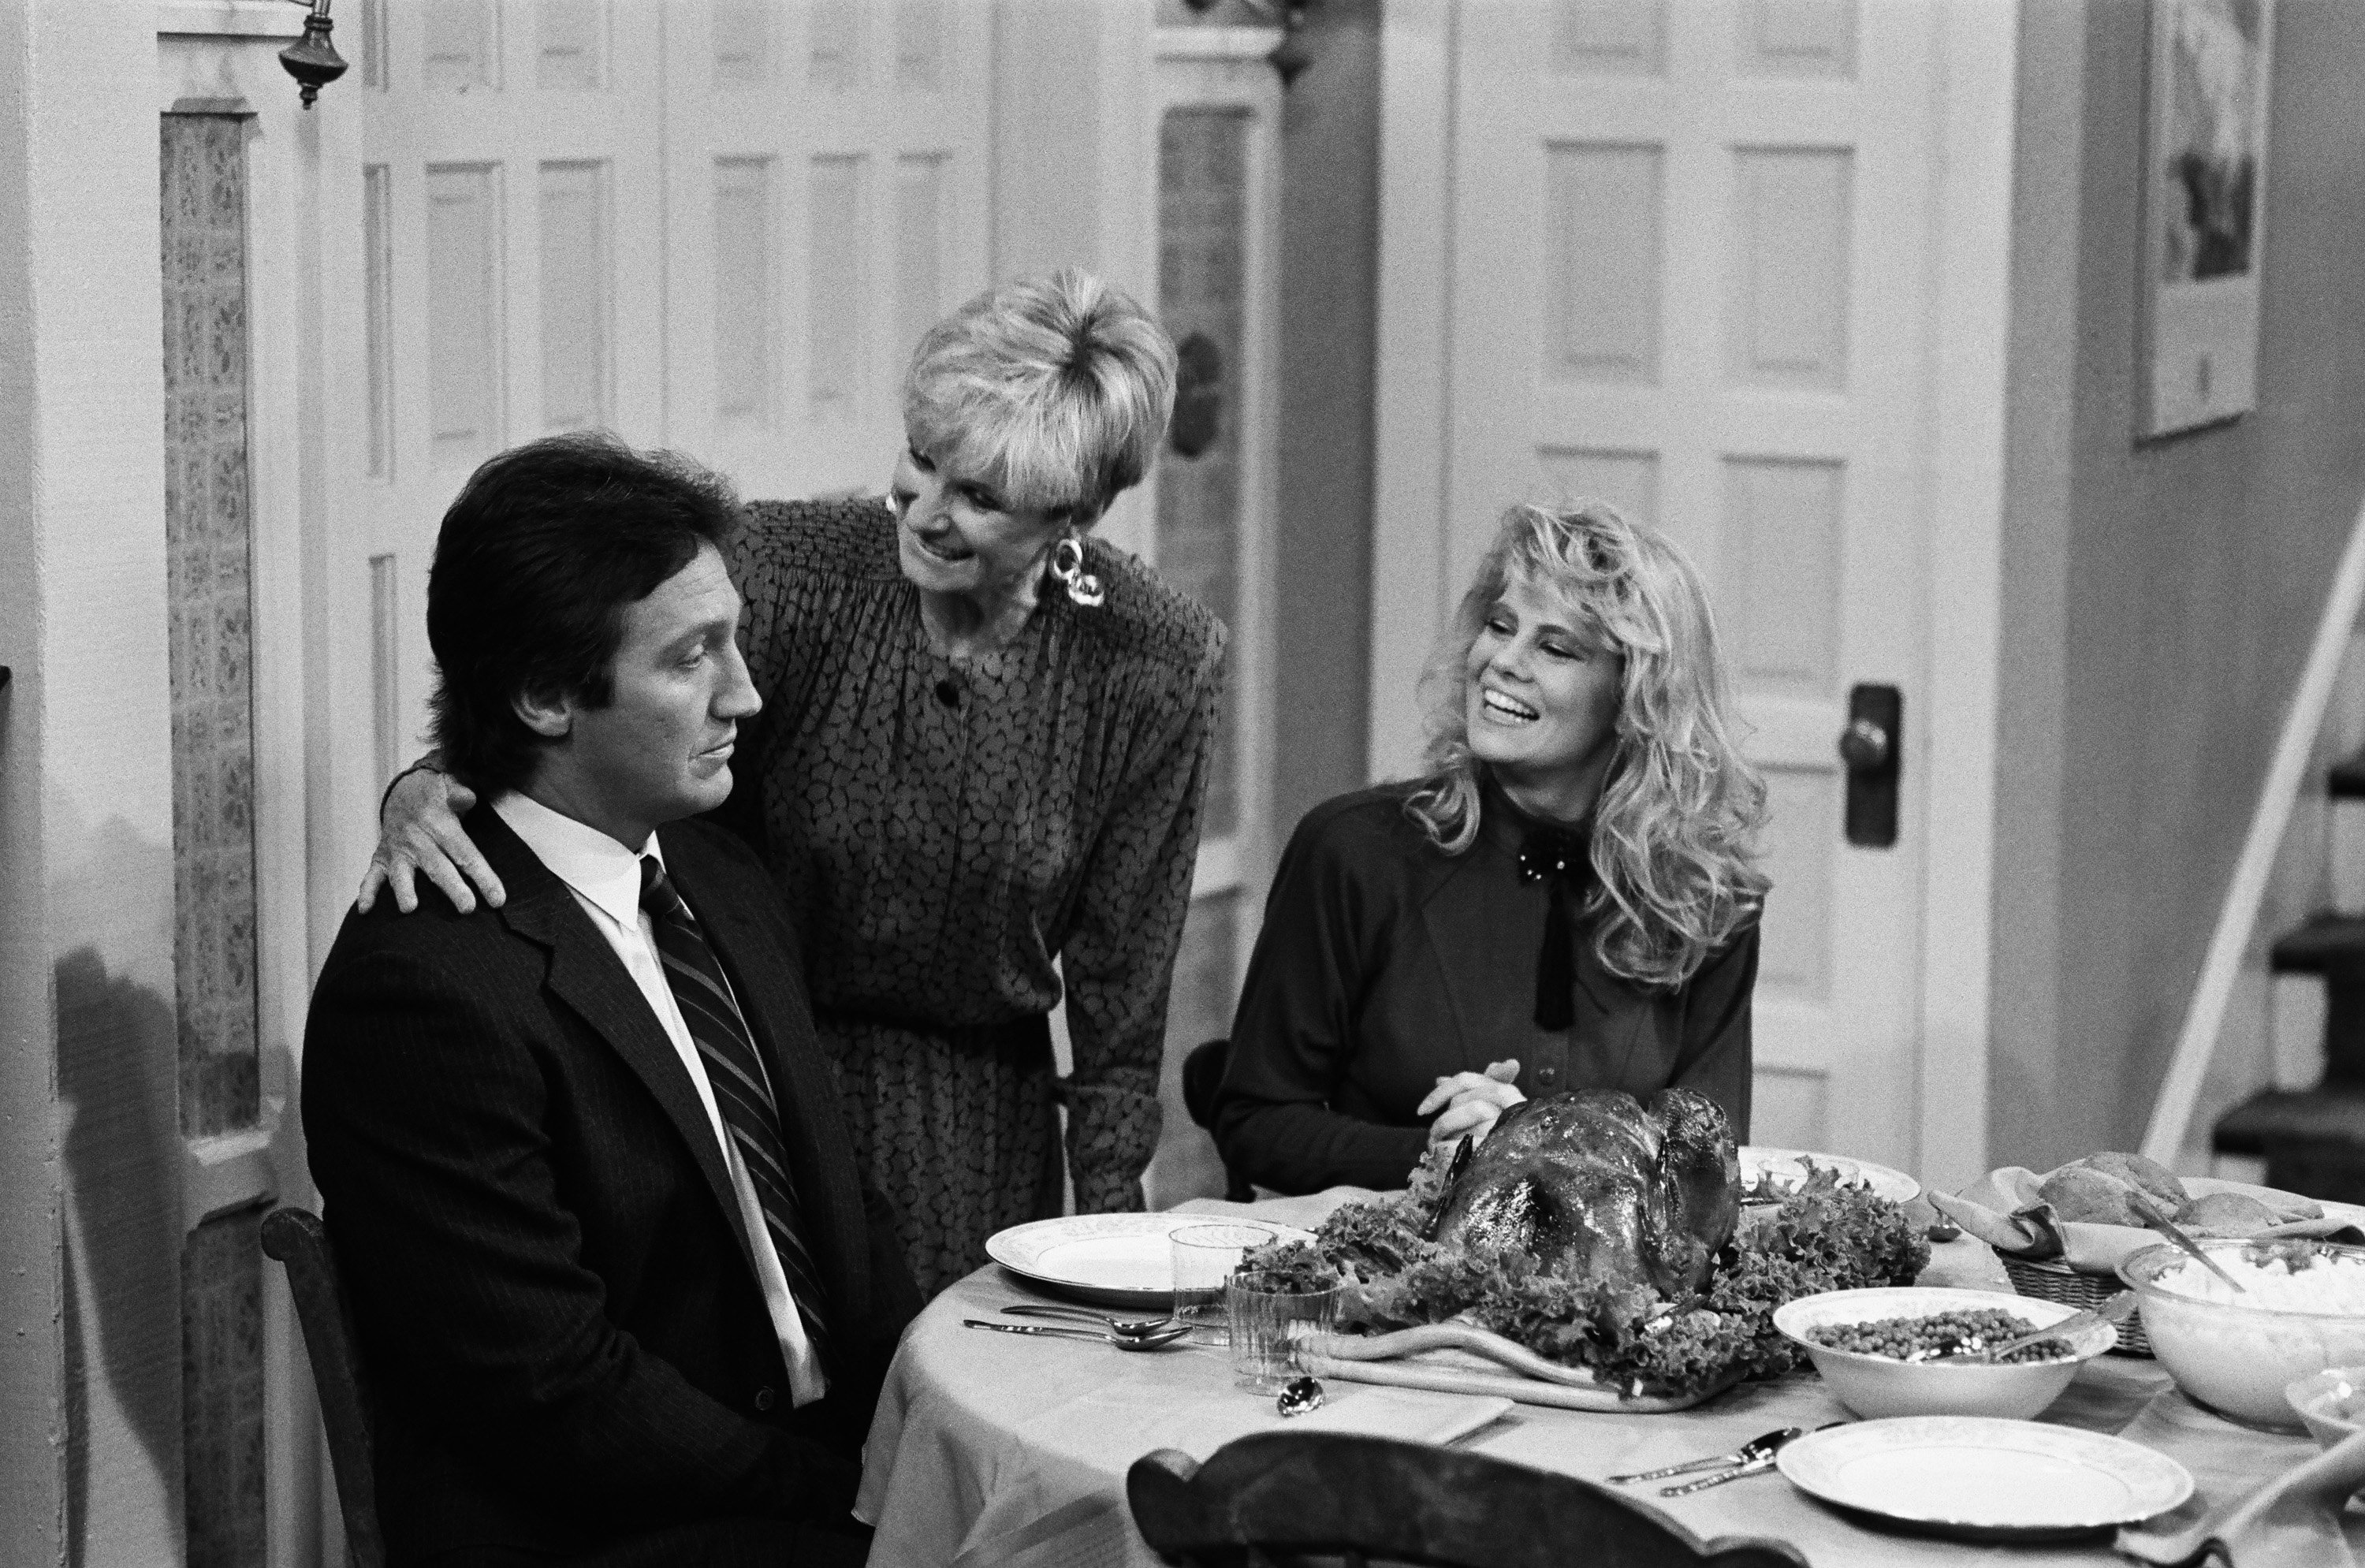 A scene from Episode 14 (Peekskill Law)\u00a0of "The Facts of Life" featuring Alan Autry,\u00a0Cloris Leachman, and\u00a0Lisa Whelchel on November 24, 1987 | Source: Getty Images